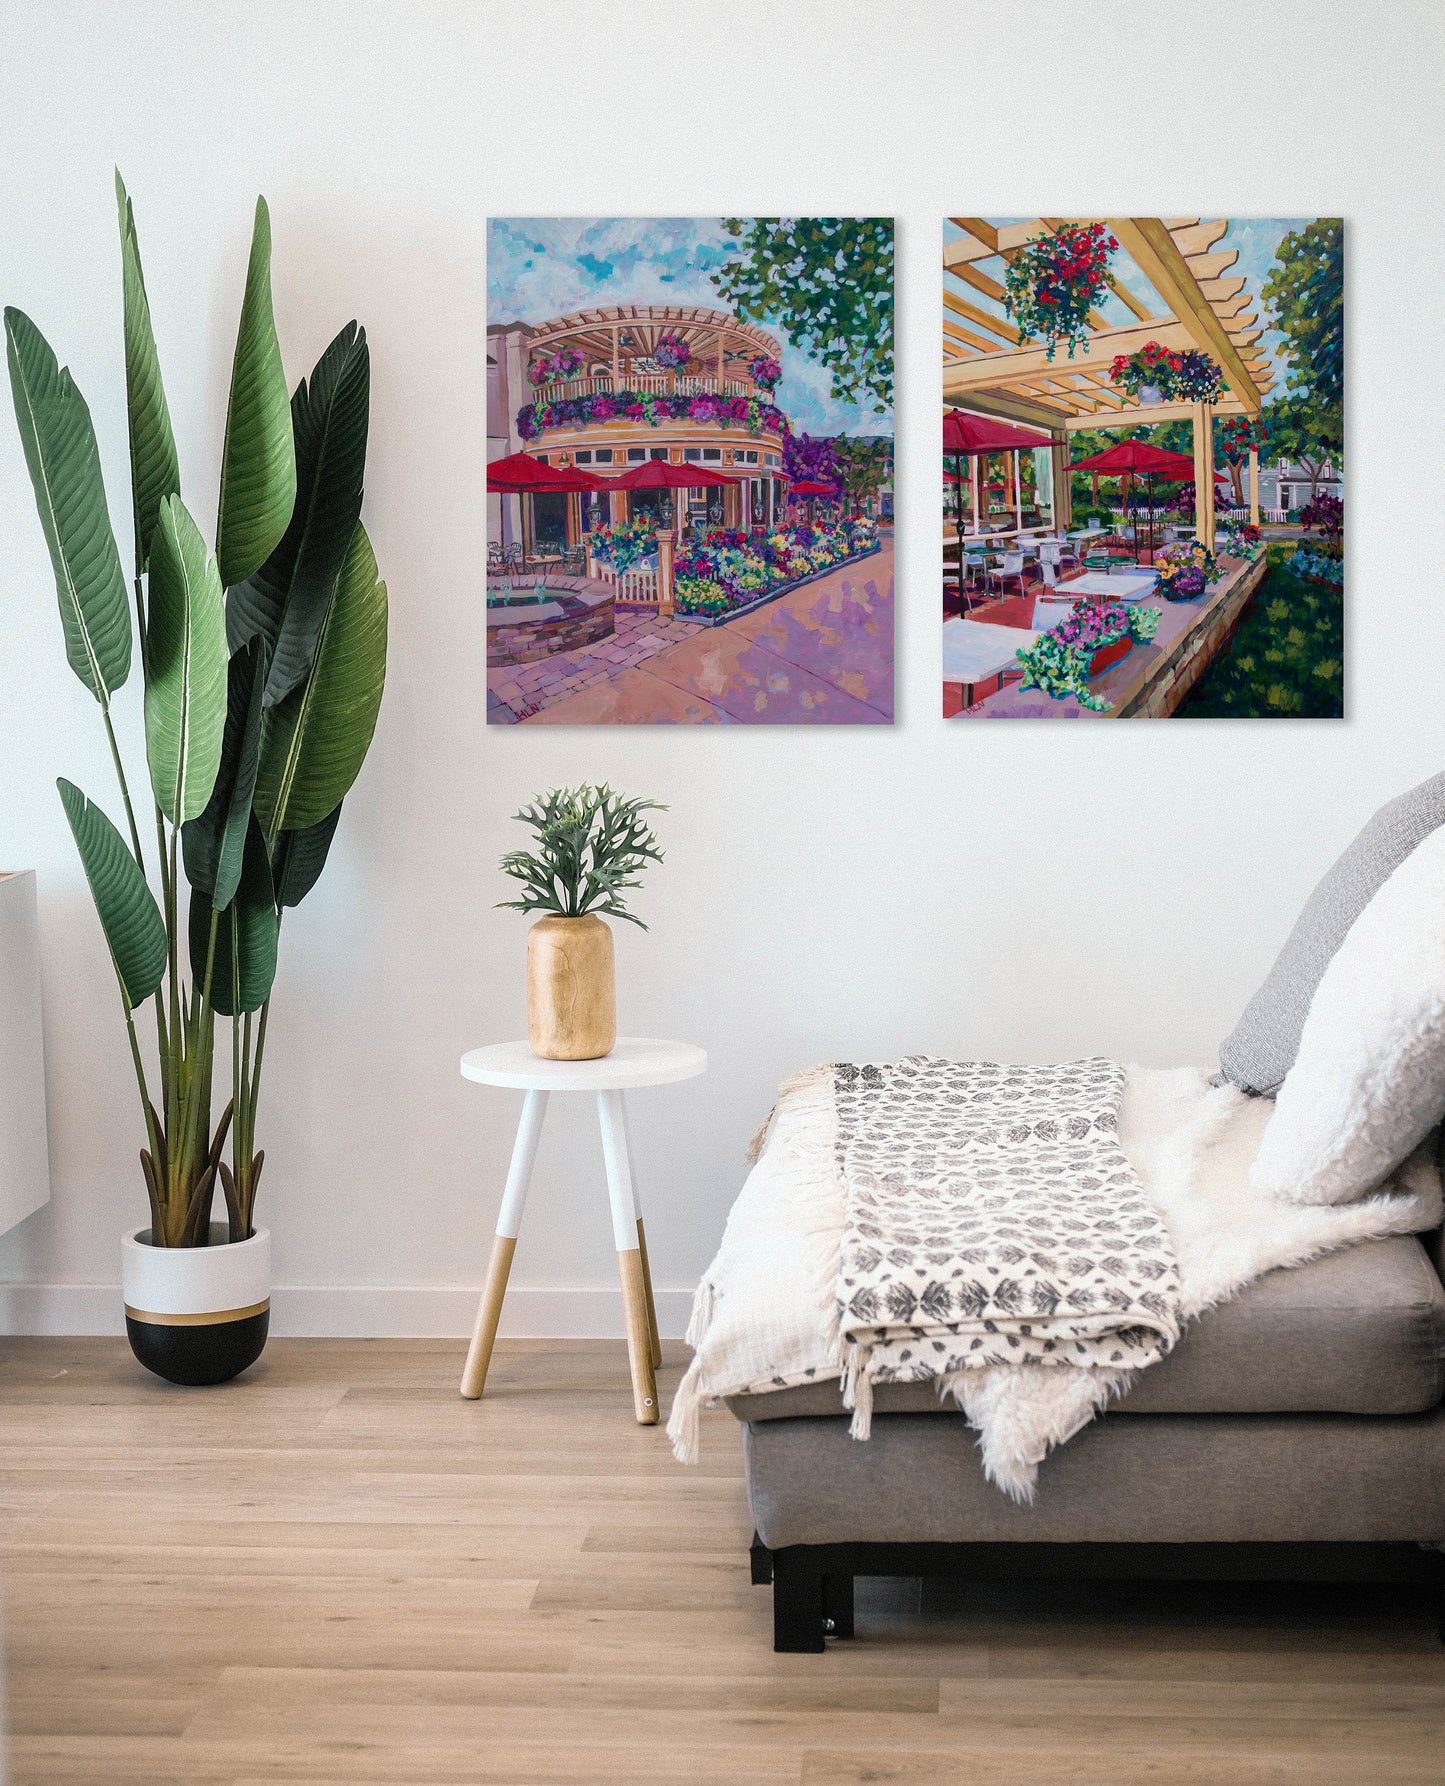 Two large original paintings of cafes from Niagara on the the Lake Canada in a living room setting with plants